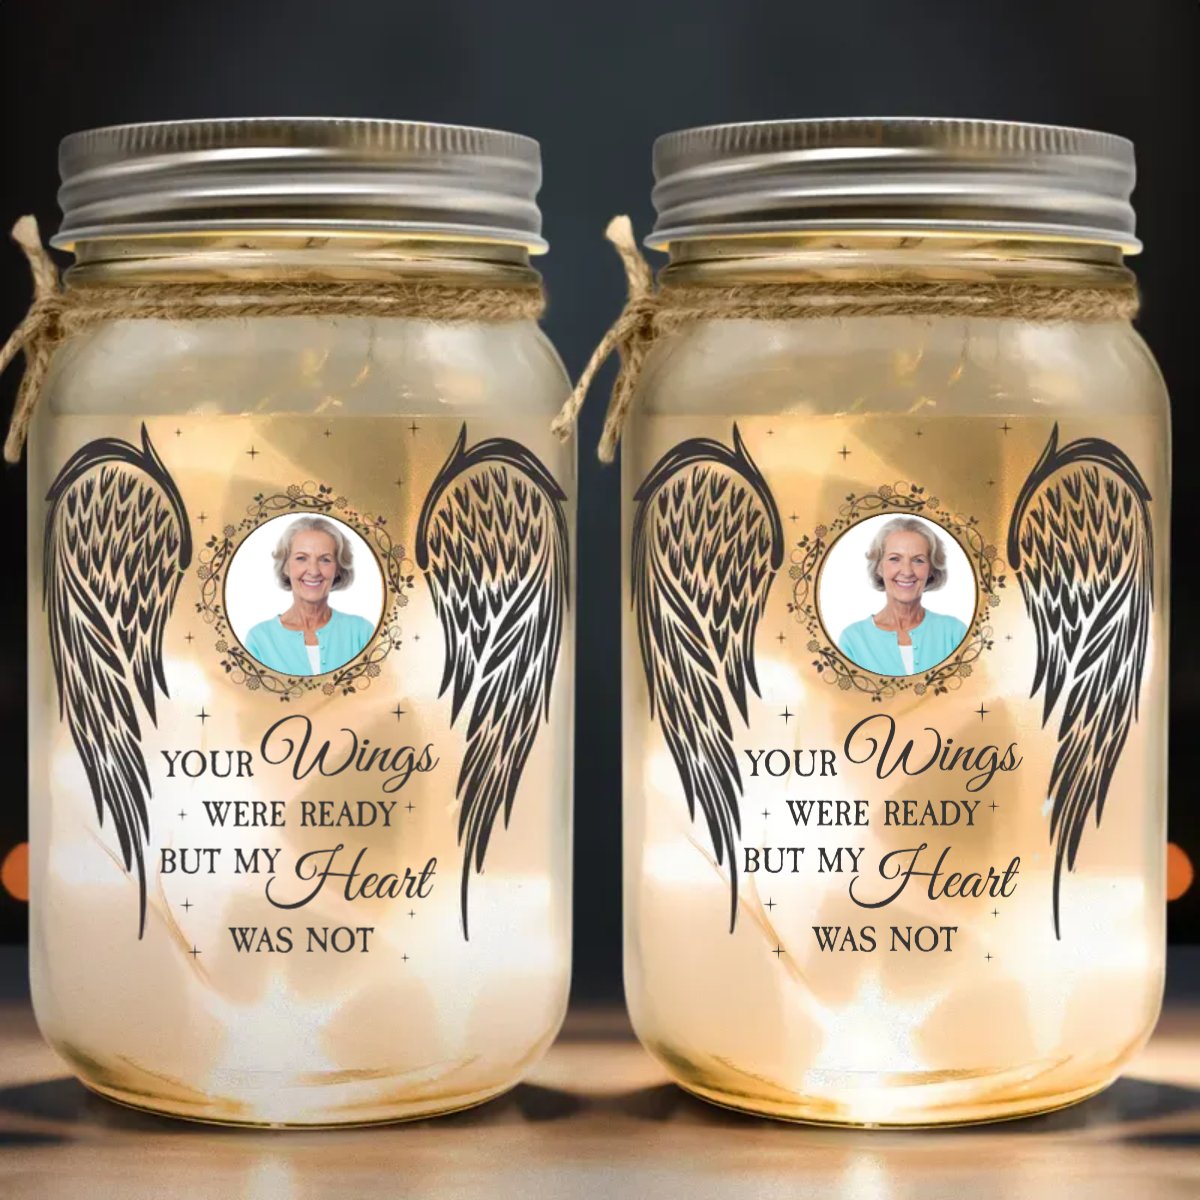 Family - I Have You In My Heart - Personalized Mason Jar Photo Light - The Next Custom Gift